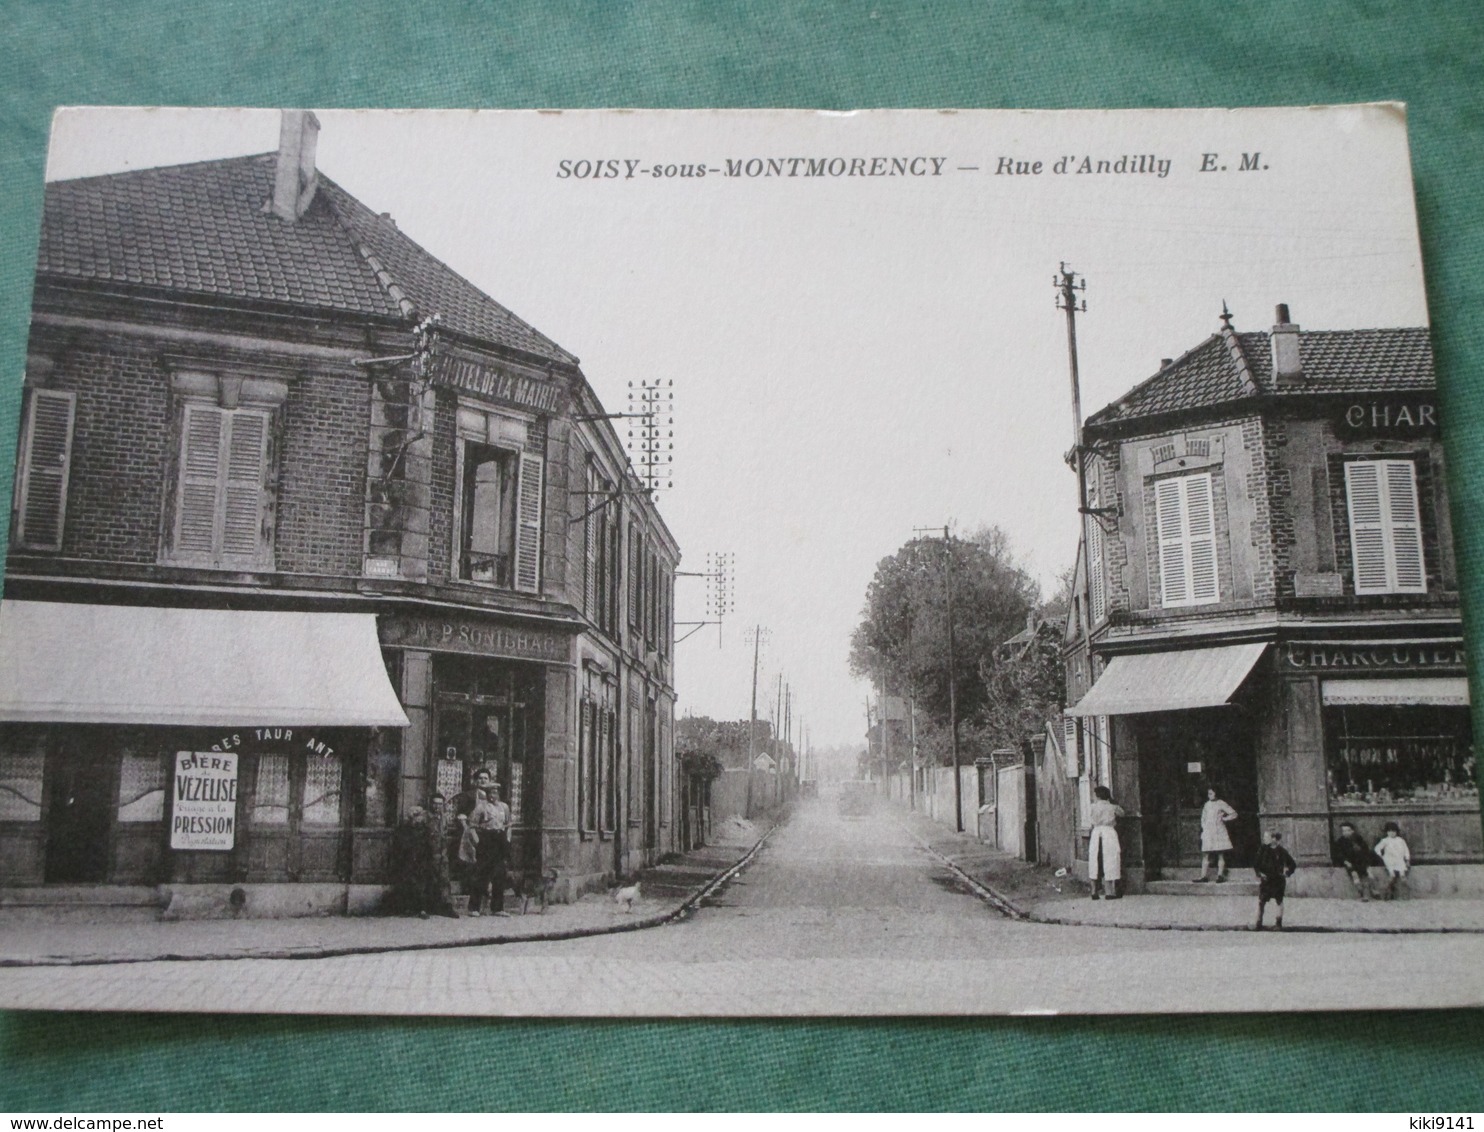 Rue D'Andilly - Soisy-sous-Montmorency